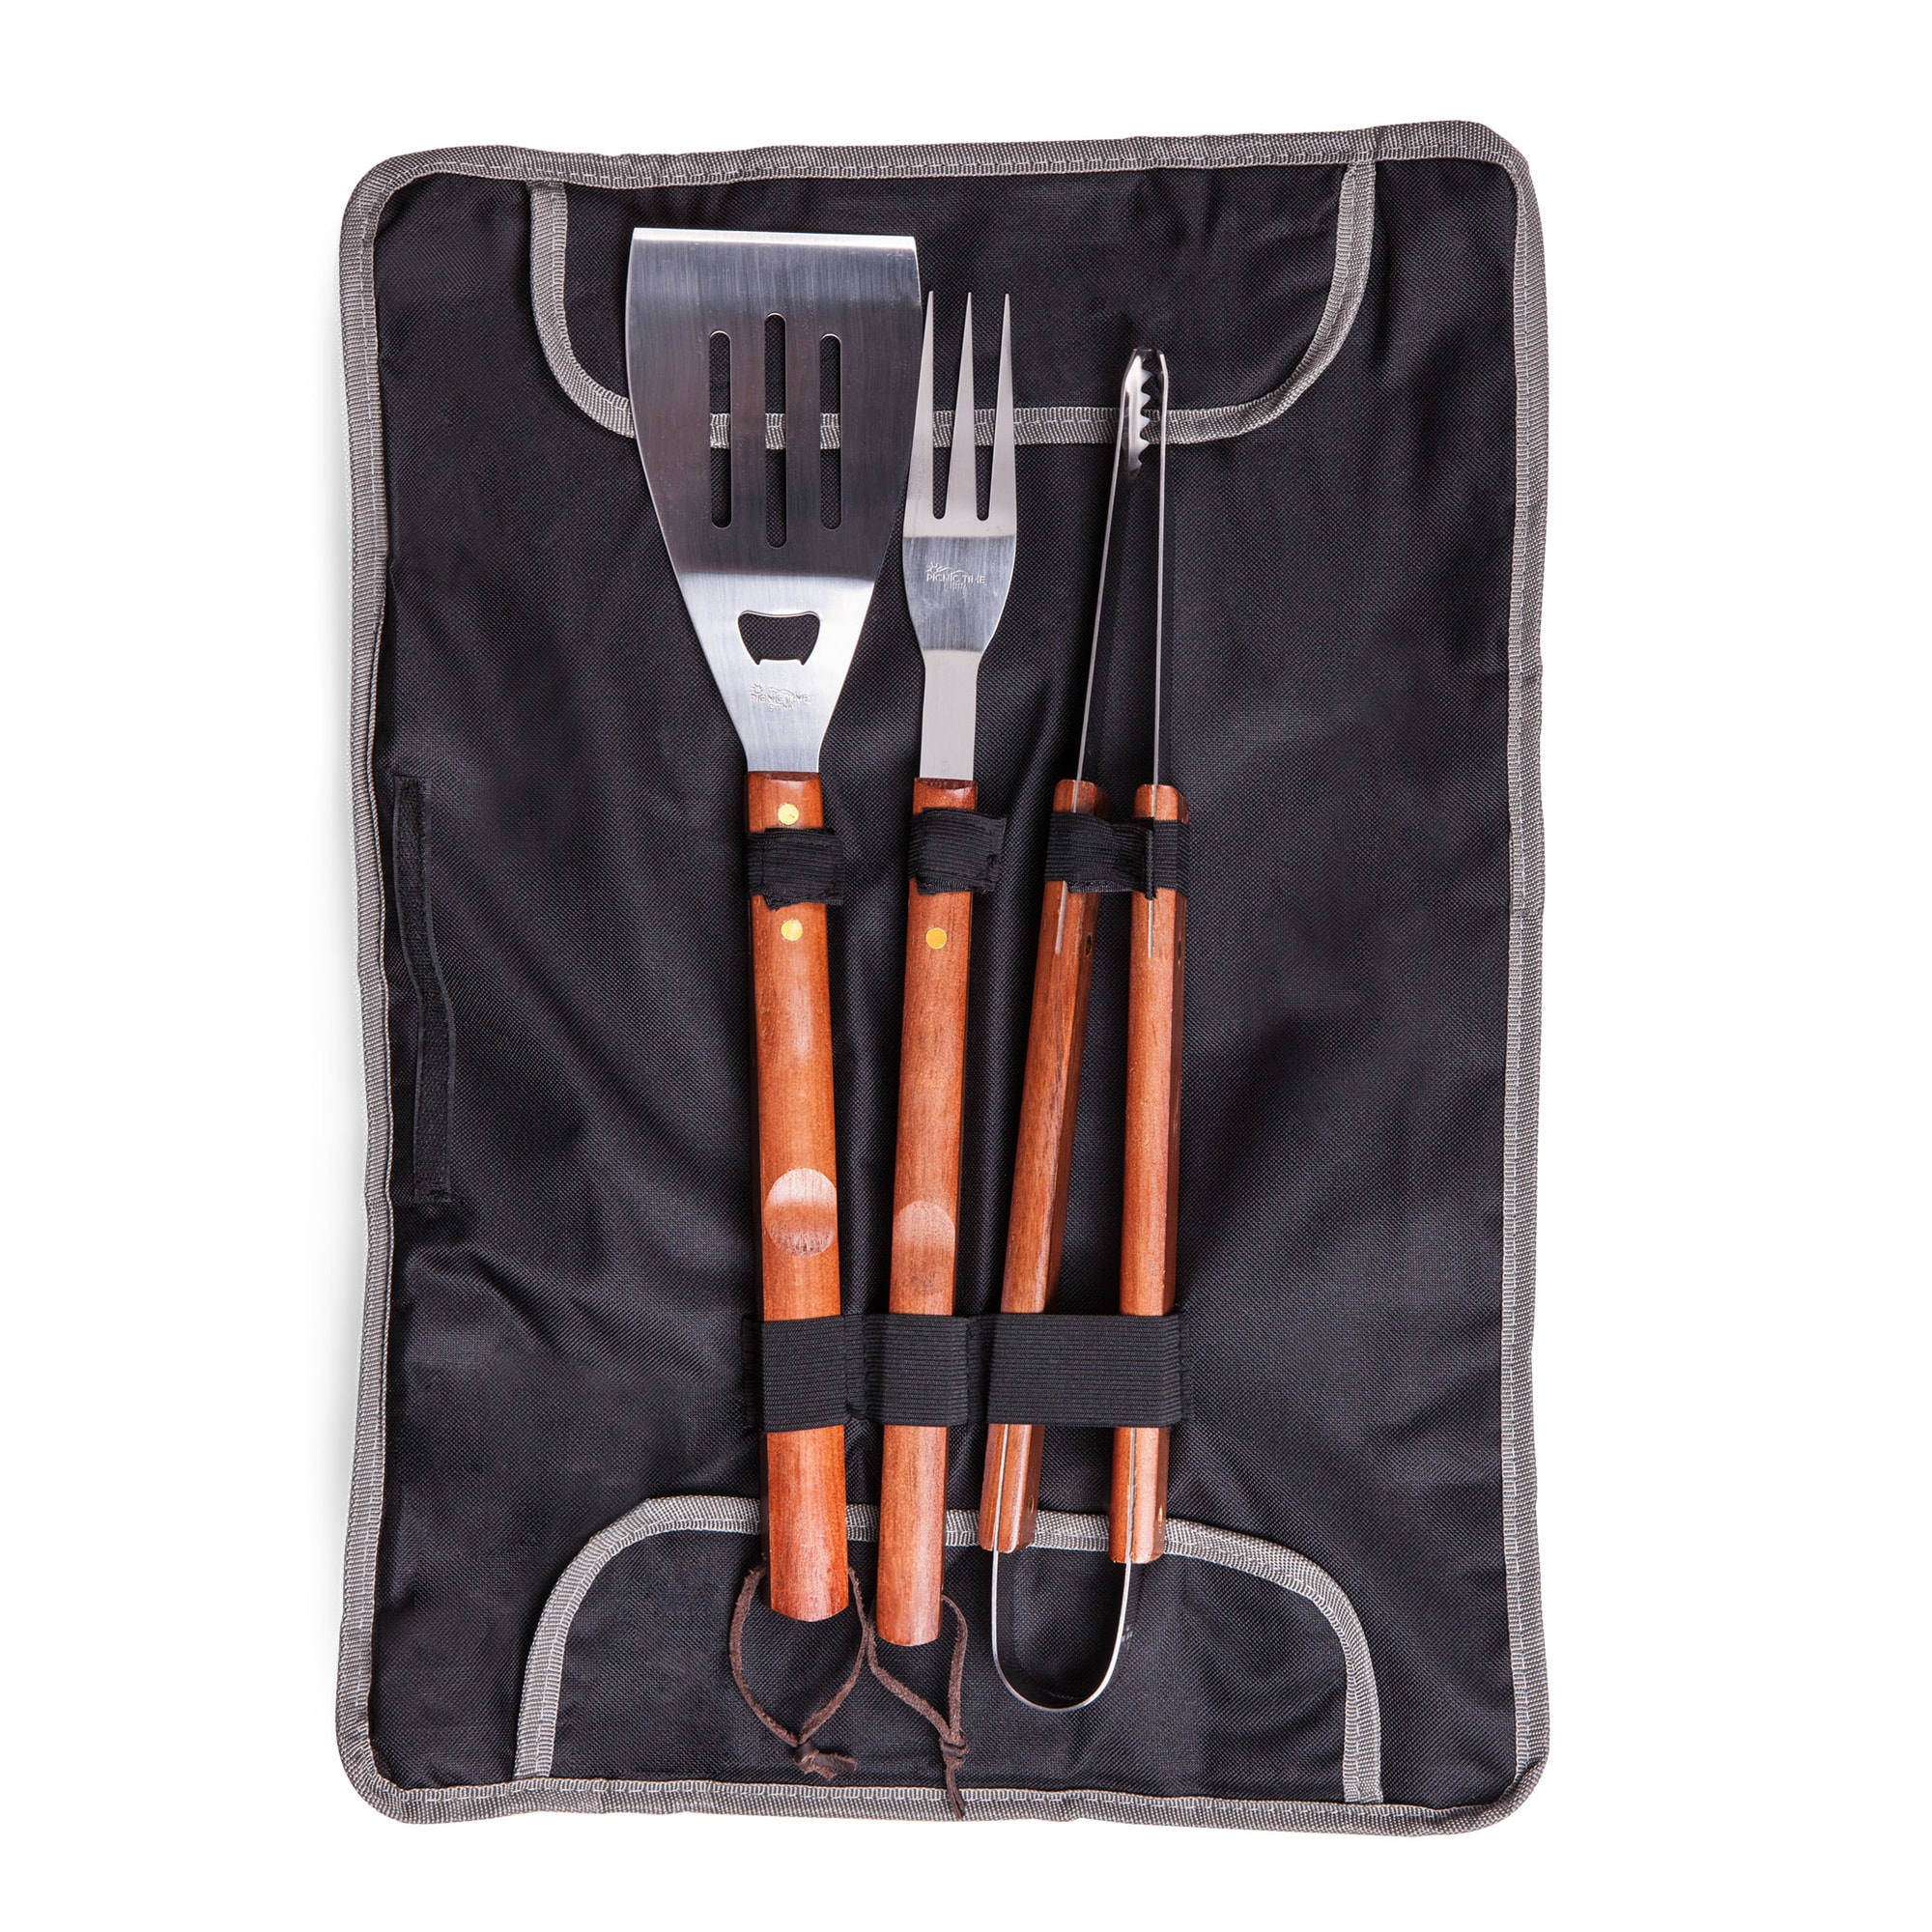 Oklahoma Team Sports Sooners 3 Piece BBQ Tool Set and Tote - image 2 of 2